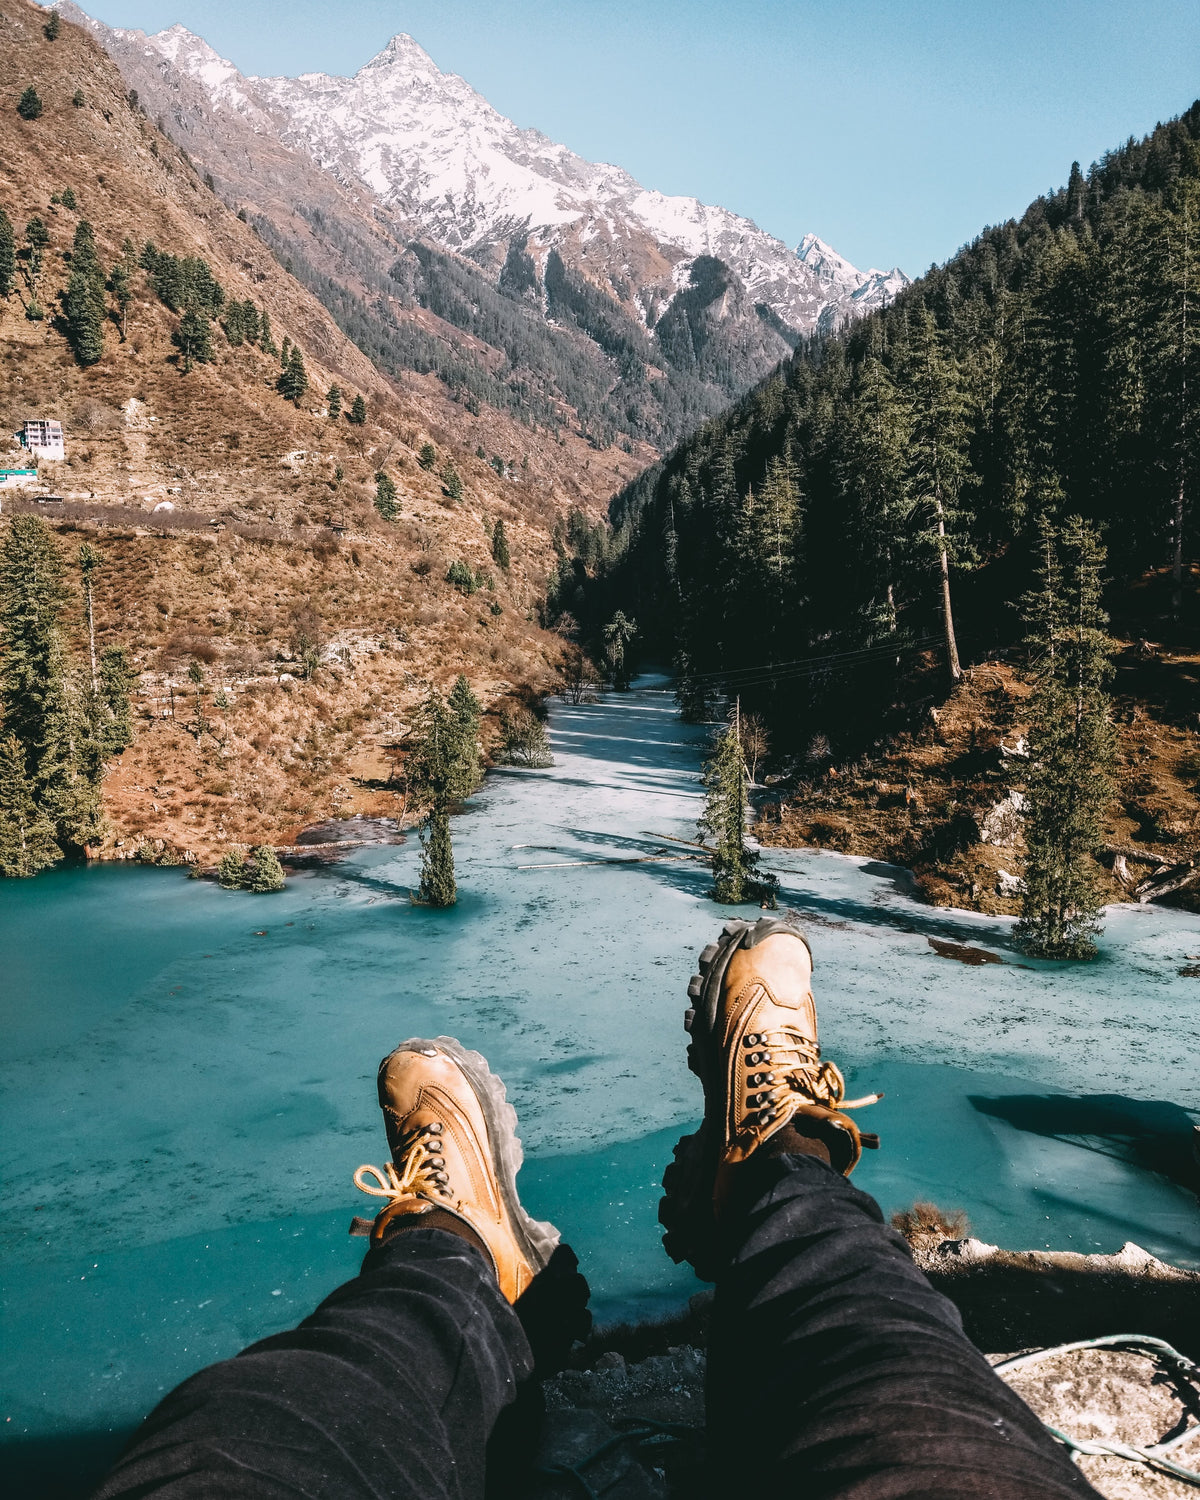 hiking shoes reach out to a cold aqua lake and rocky mountians